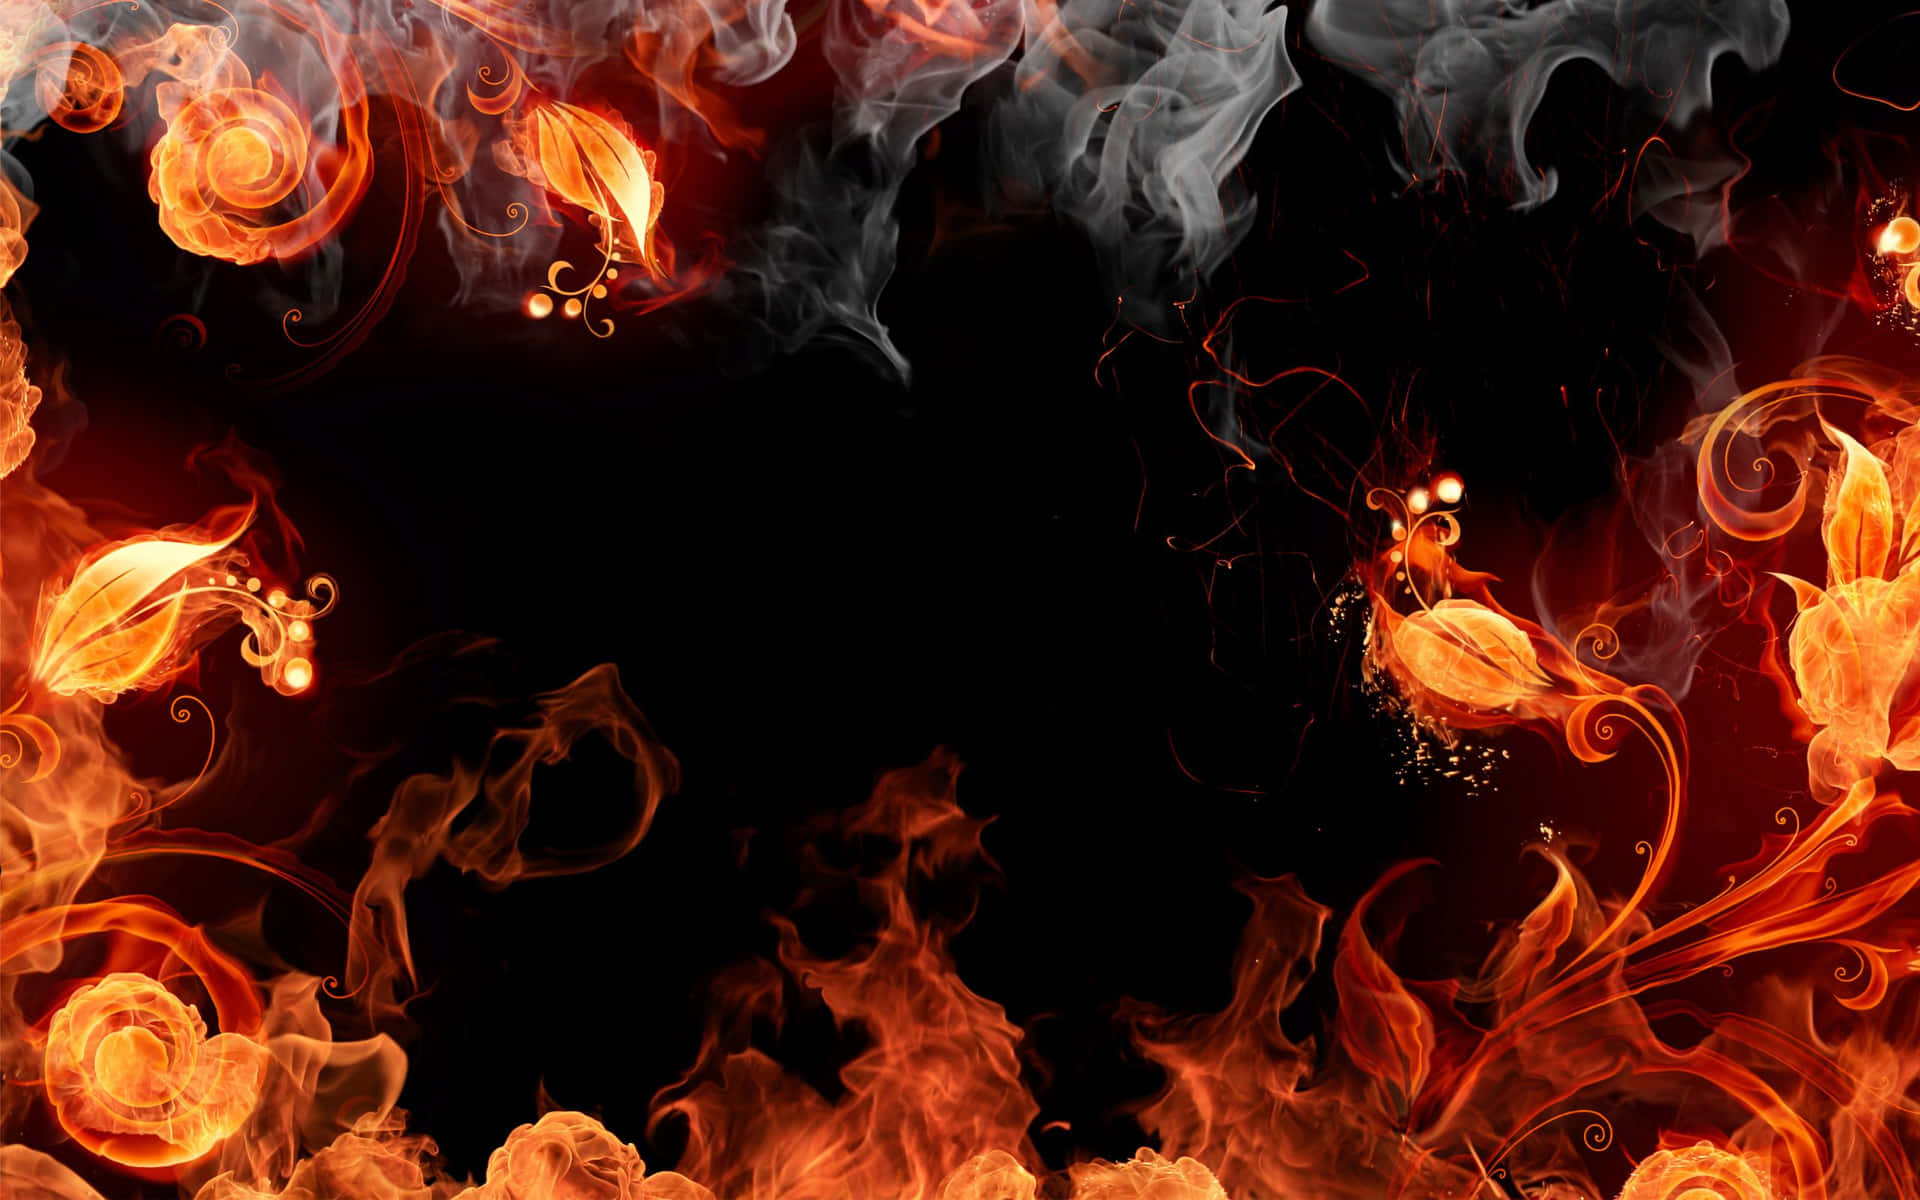 Dancing Flames on a Dark Background